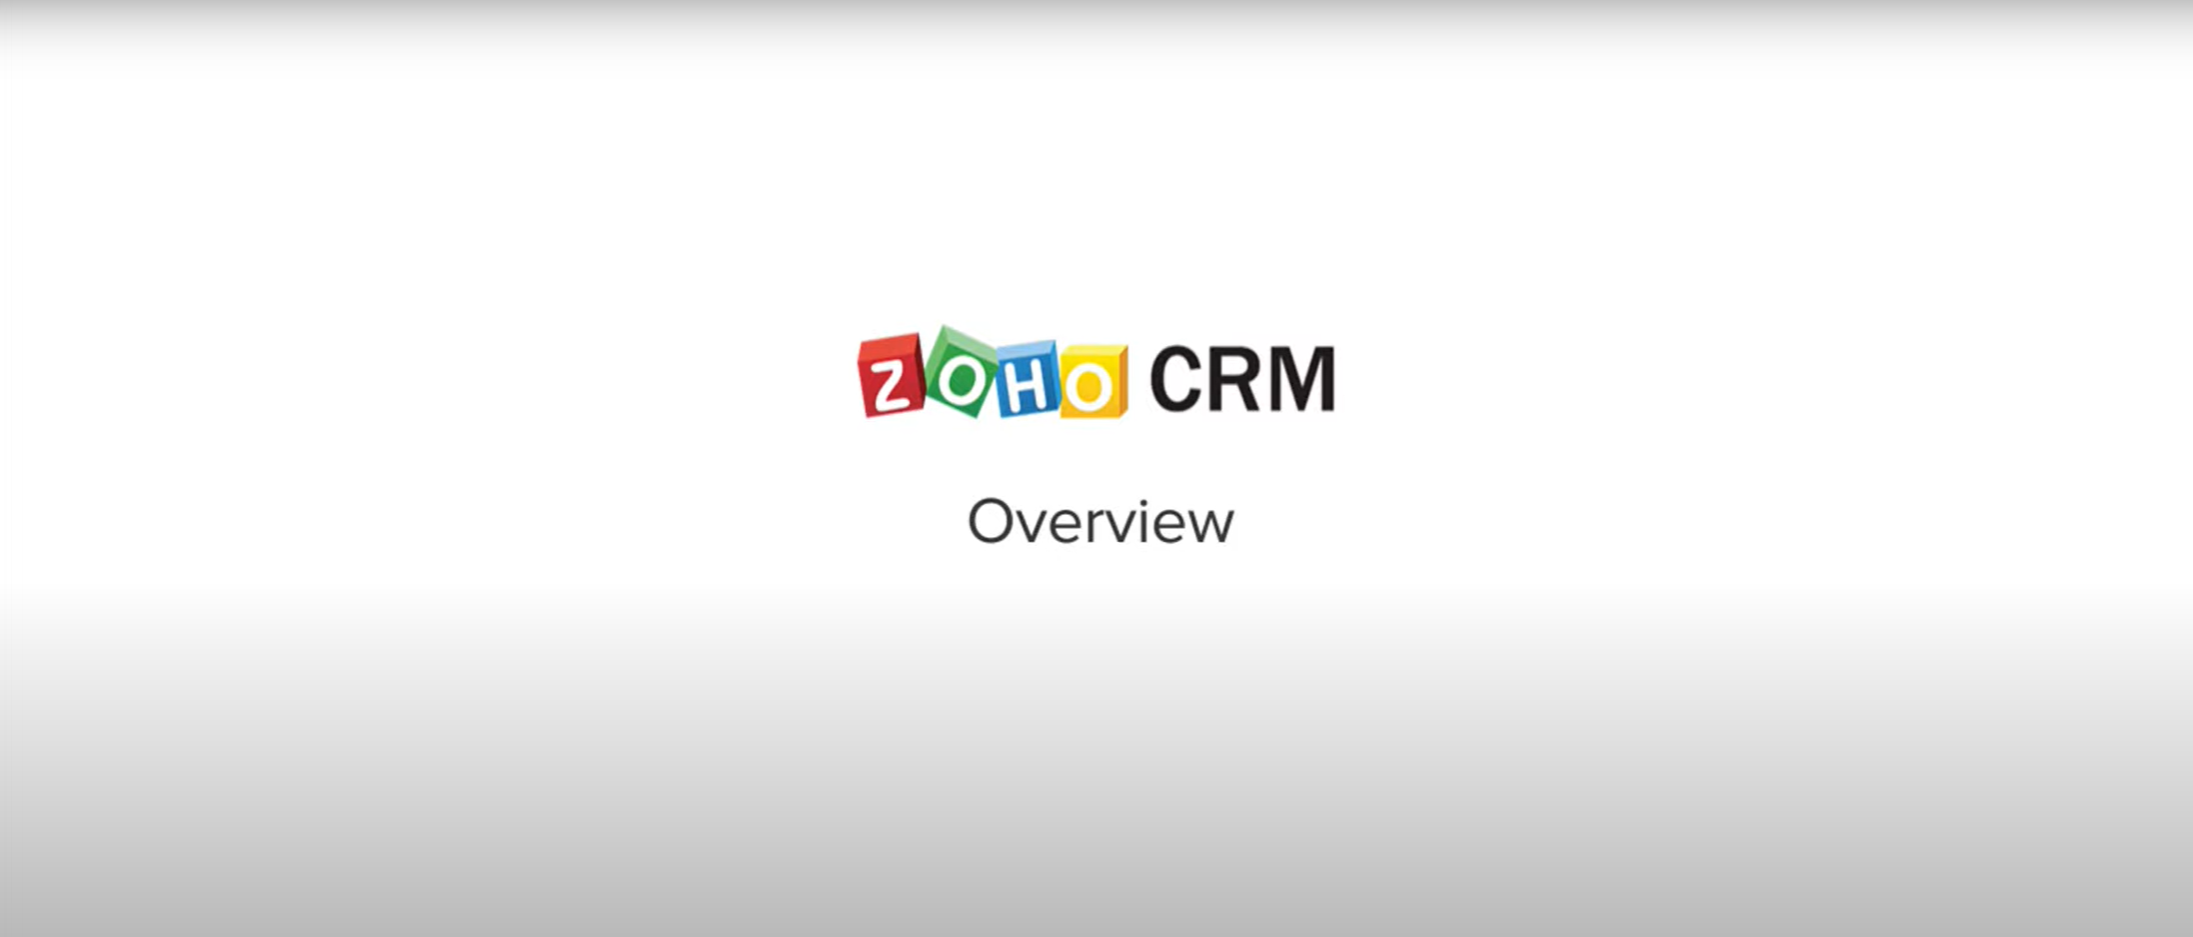 Zoho CRM Overview